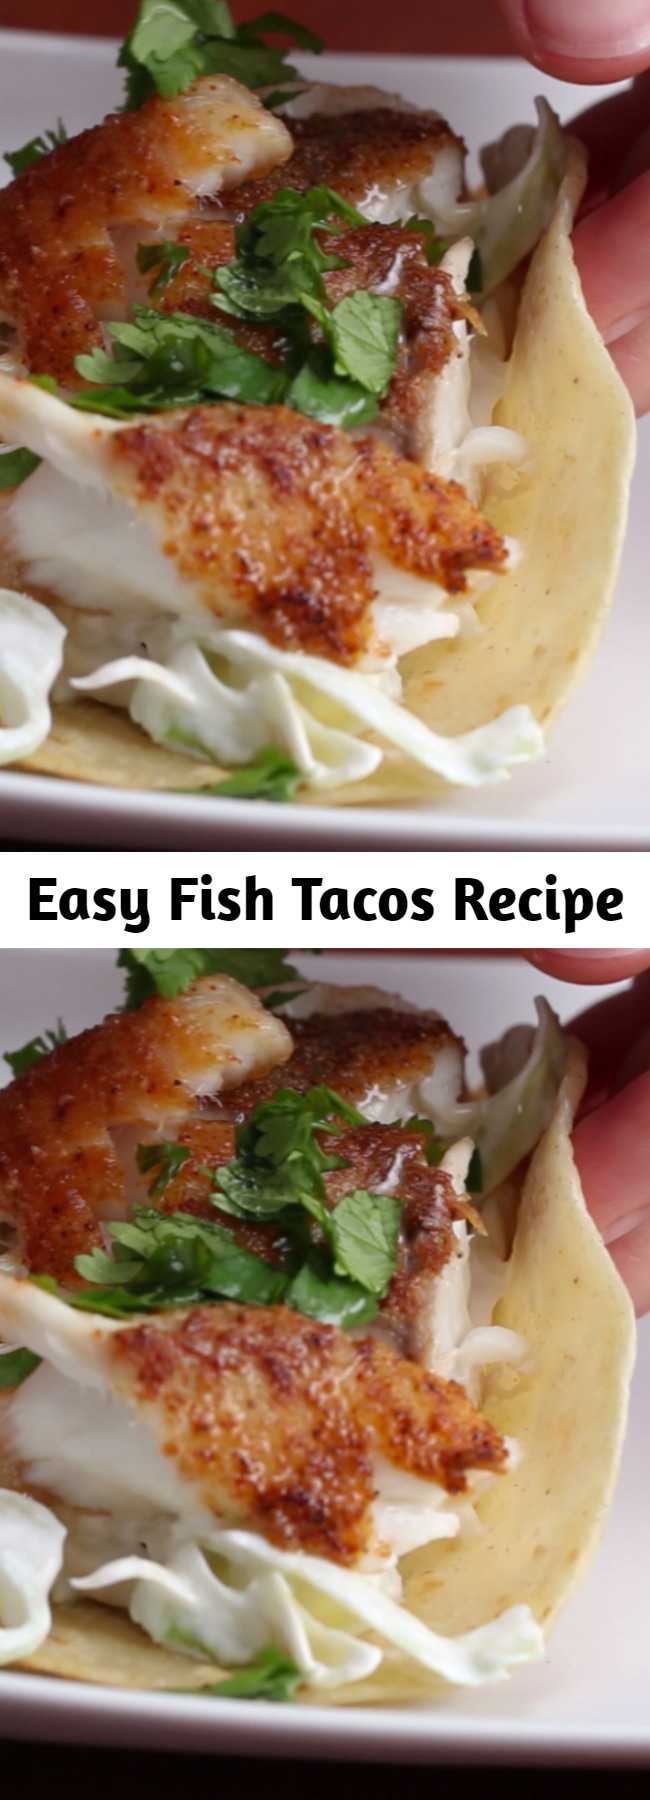 Easy Fish Tacos Recipe - Fish tacos are the best tacos.